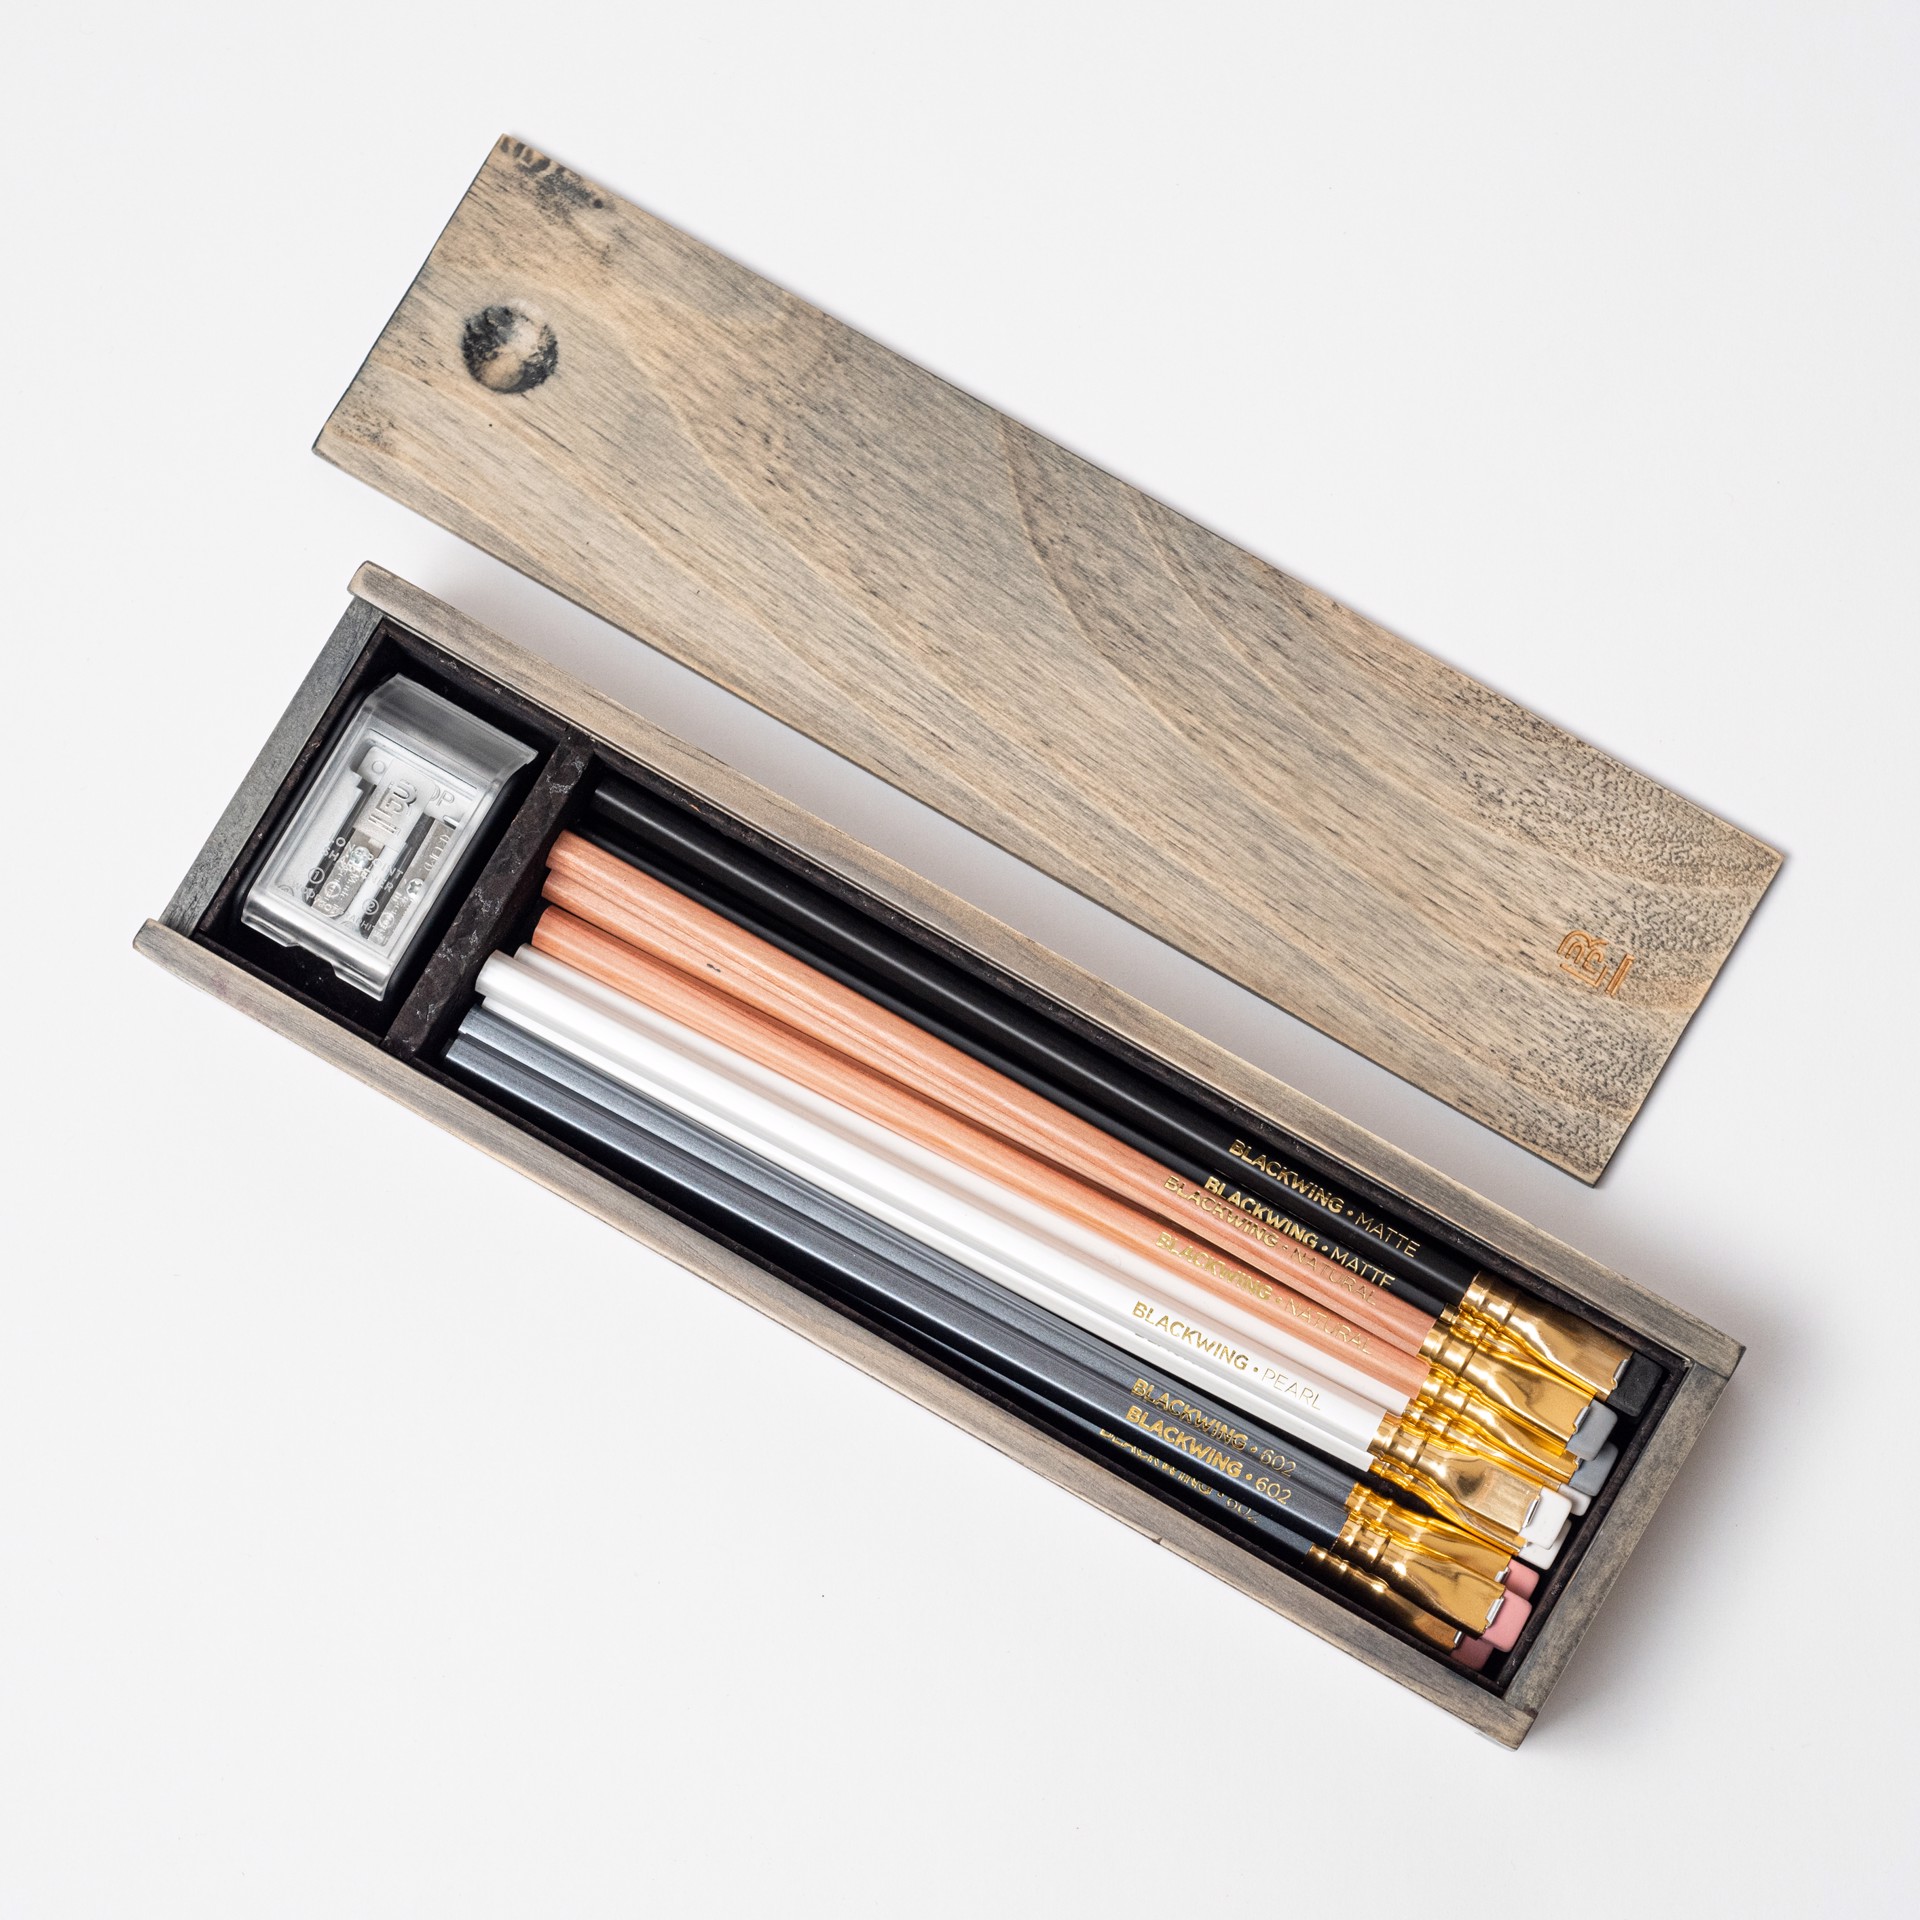 Rustic Box Set by Blackwing